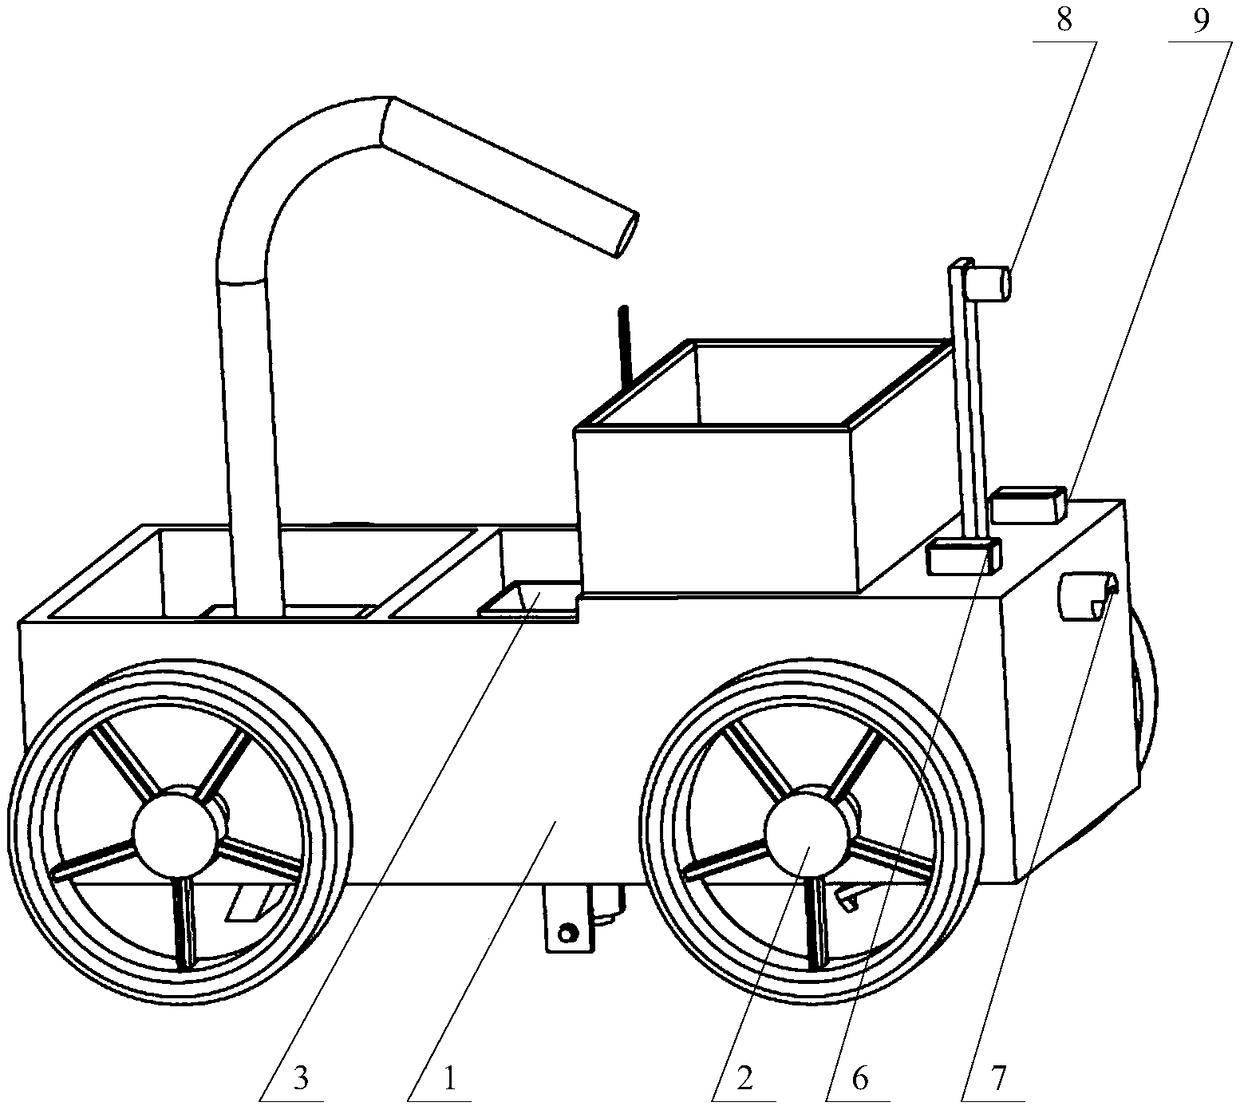 A sowing and fertilizing vehicle